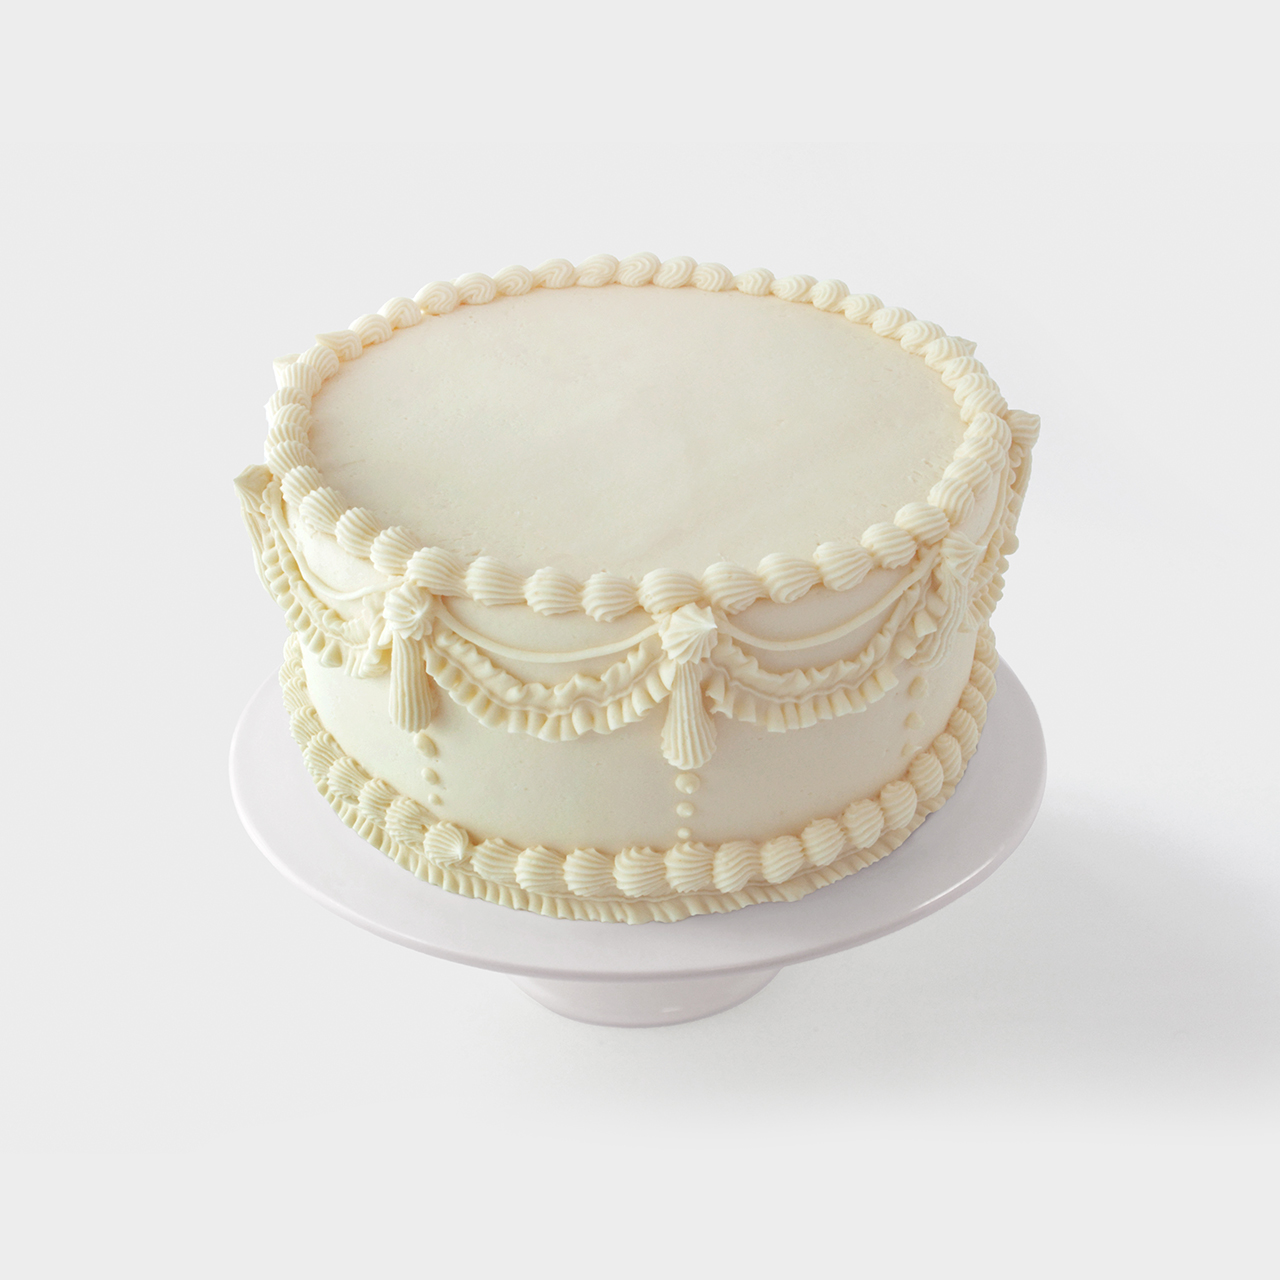 Cintage cake design with white buttercream